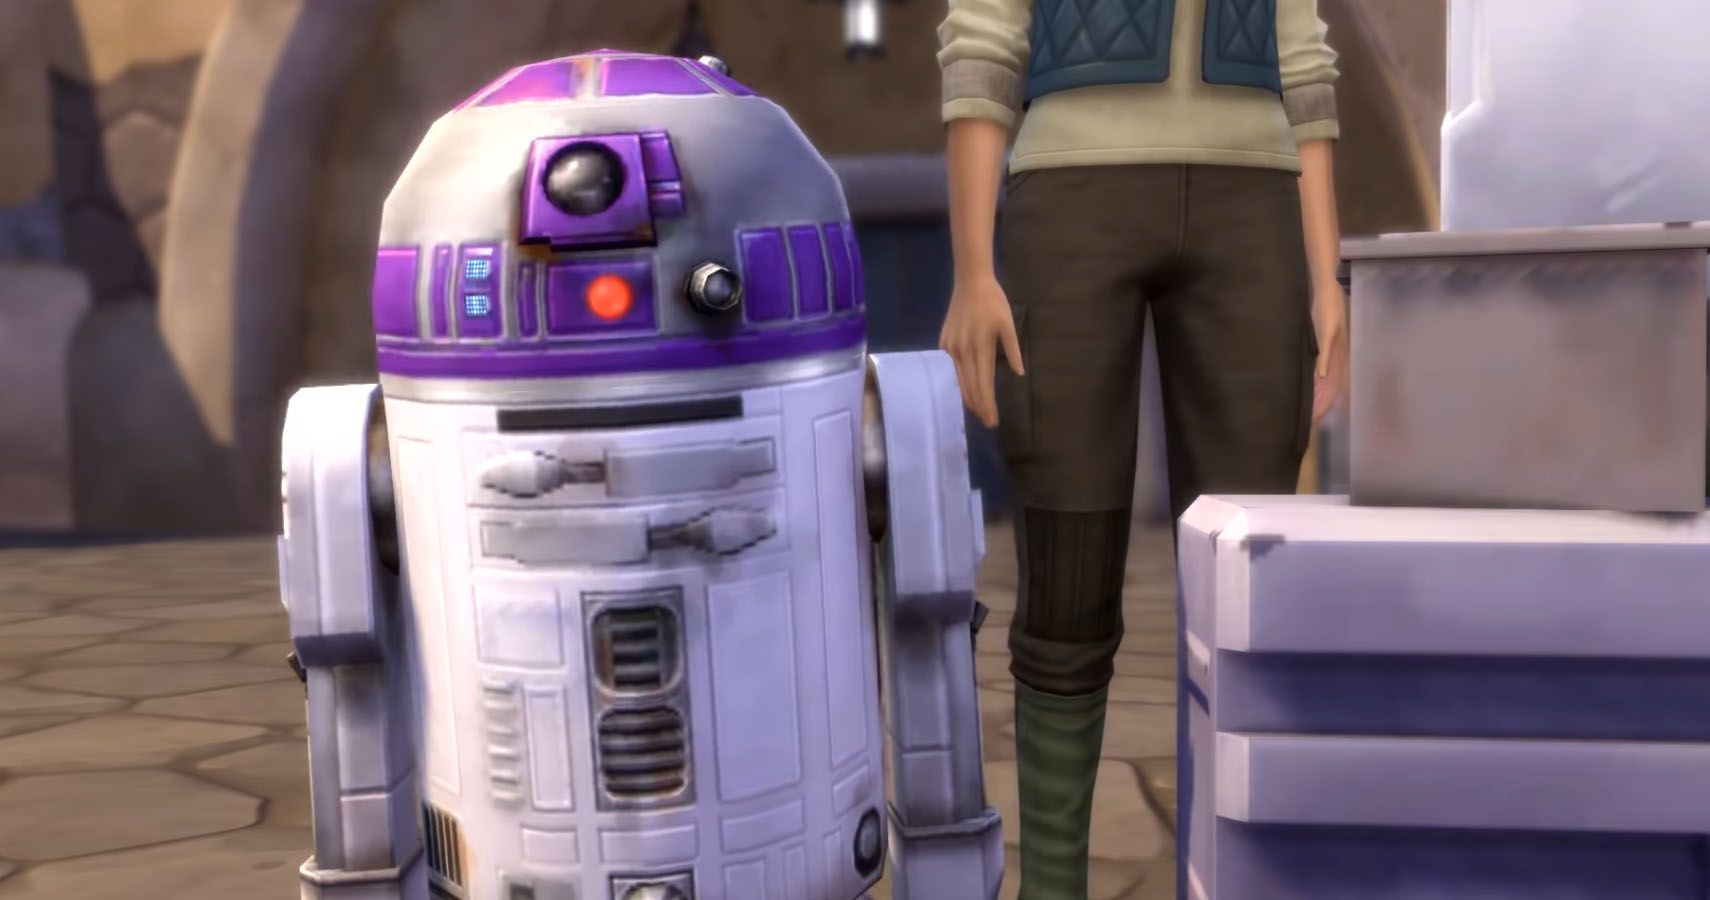 Close up of an R unit droid resembling R2D2.